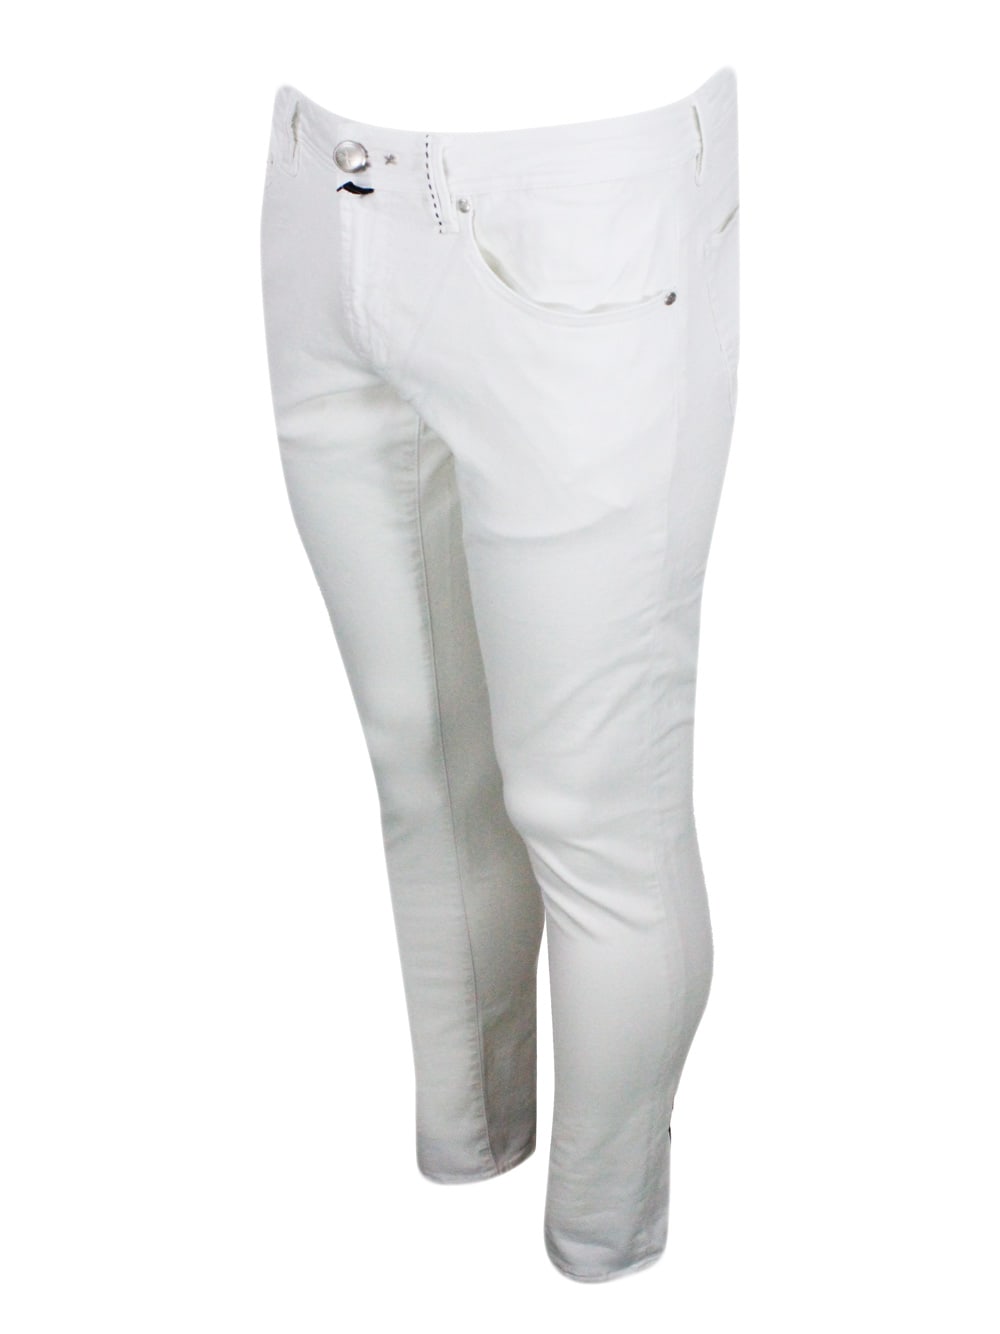 Shop Sartoria Tramarossa Leonardo Slim Zip Trousers In Soft Cotton With 5 Pockets With Tailored Stitching And Suede Tab. Zip  In White